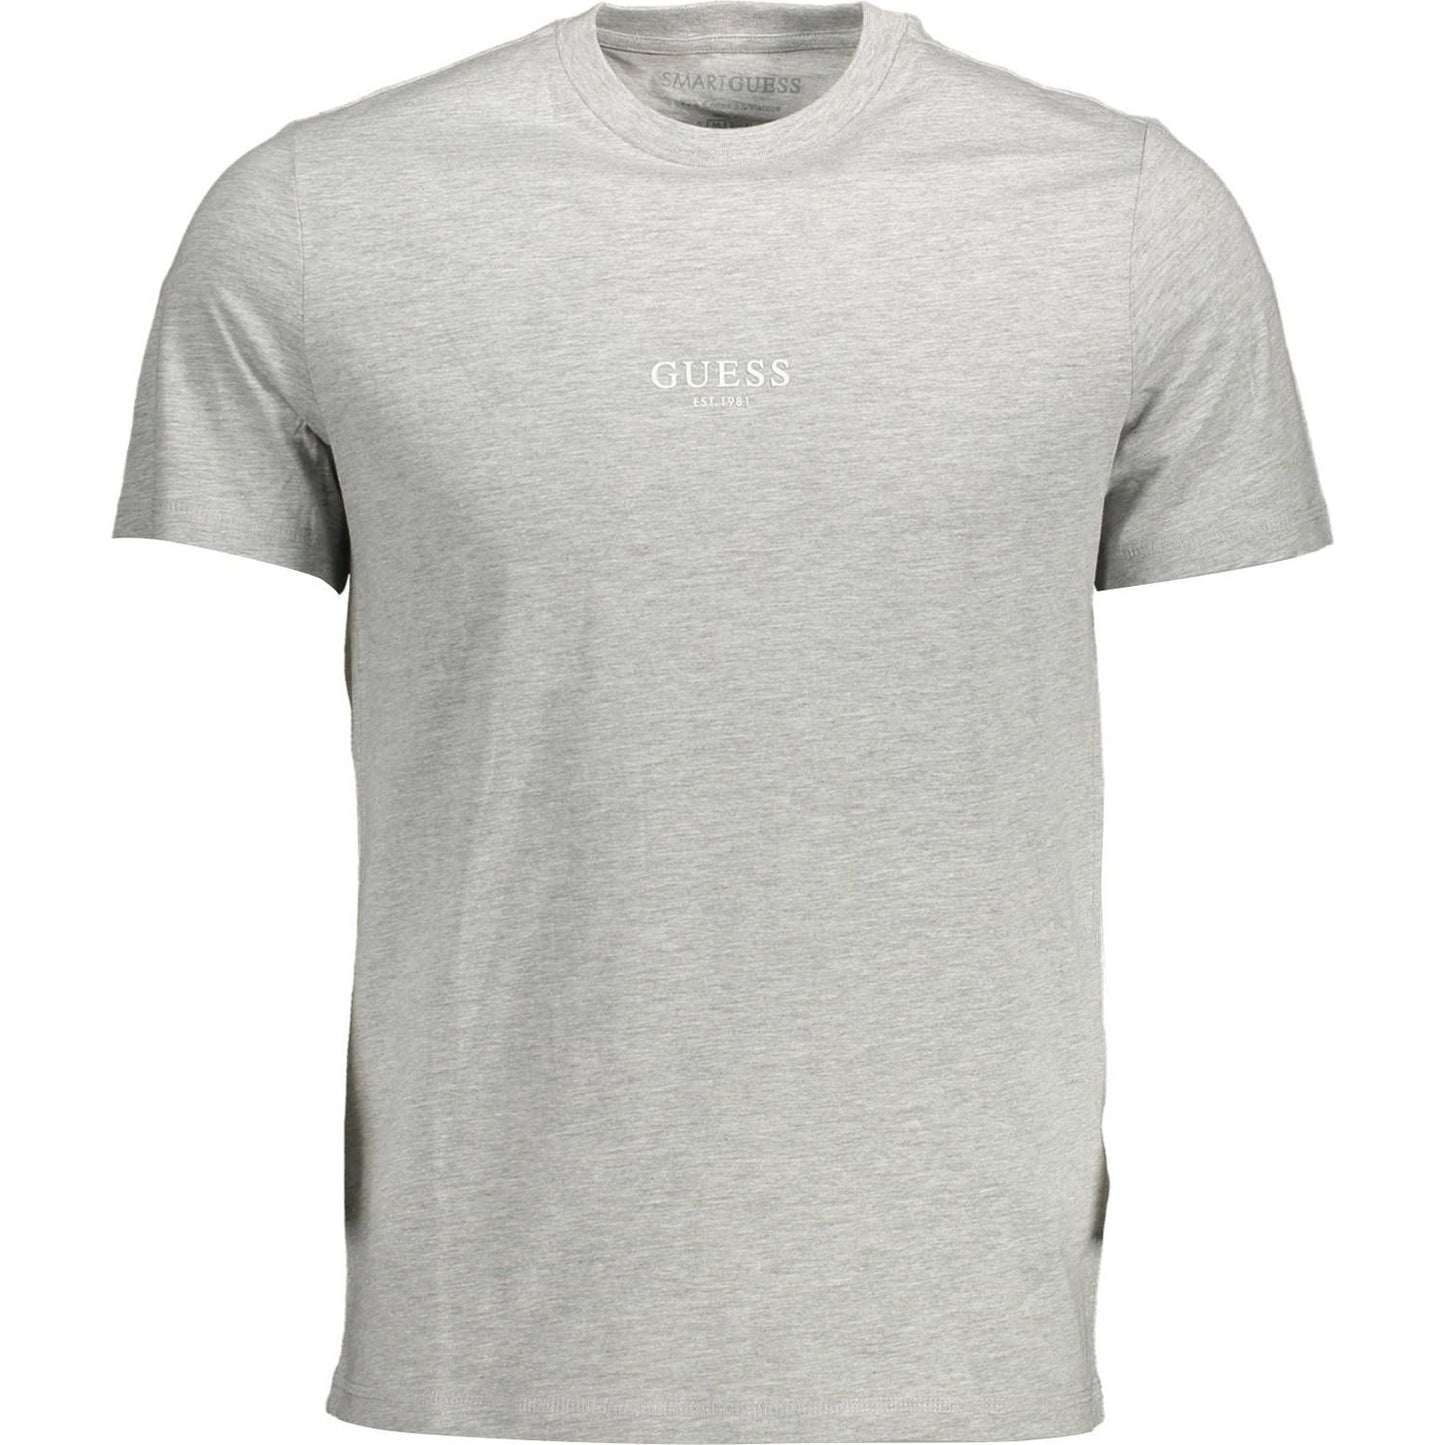 Guess Jeans Chic Gray Slim Fit Organic Cotton Tee chic-gray-slim-fit-organic-cotton-tee